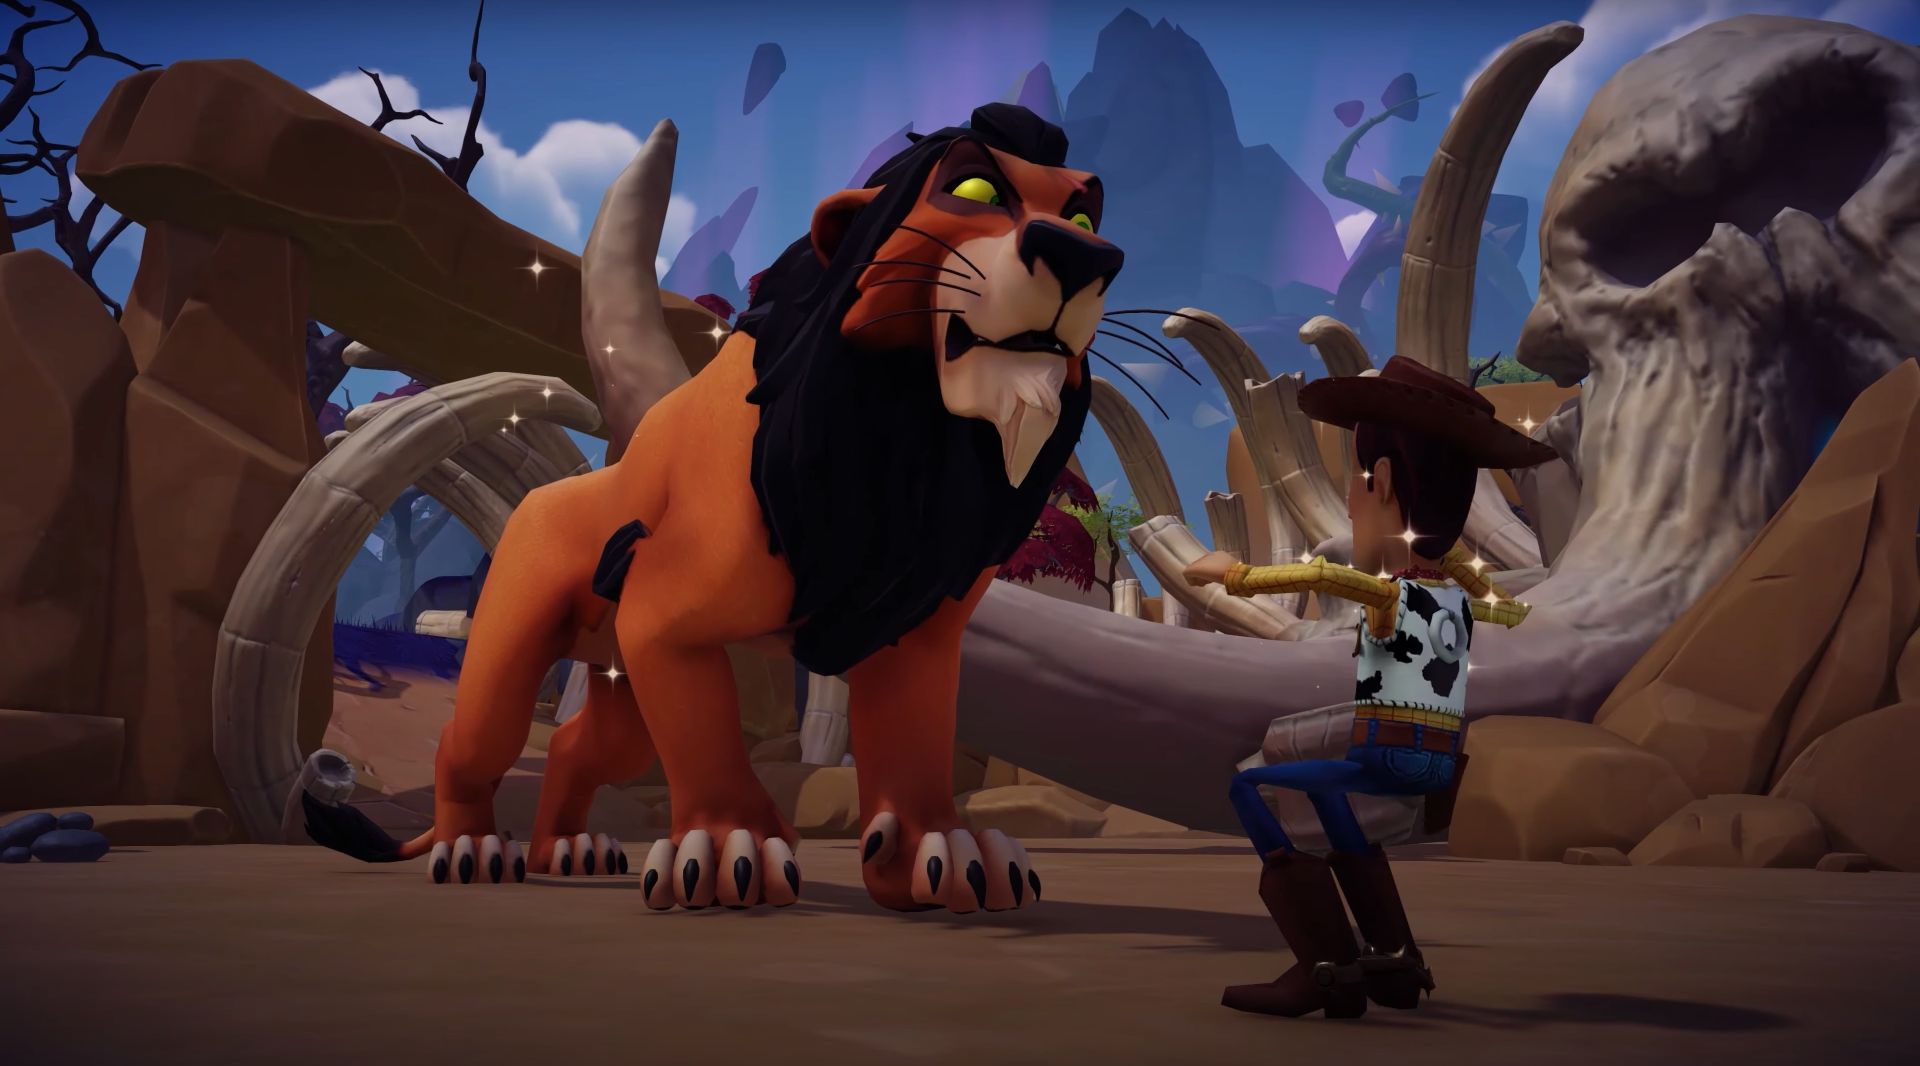 Woody from Toy Story meets Scar the kingslayer from The Lion King in Disney Dreamlight Valley.